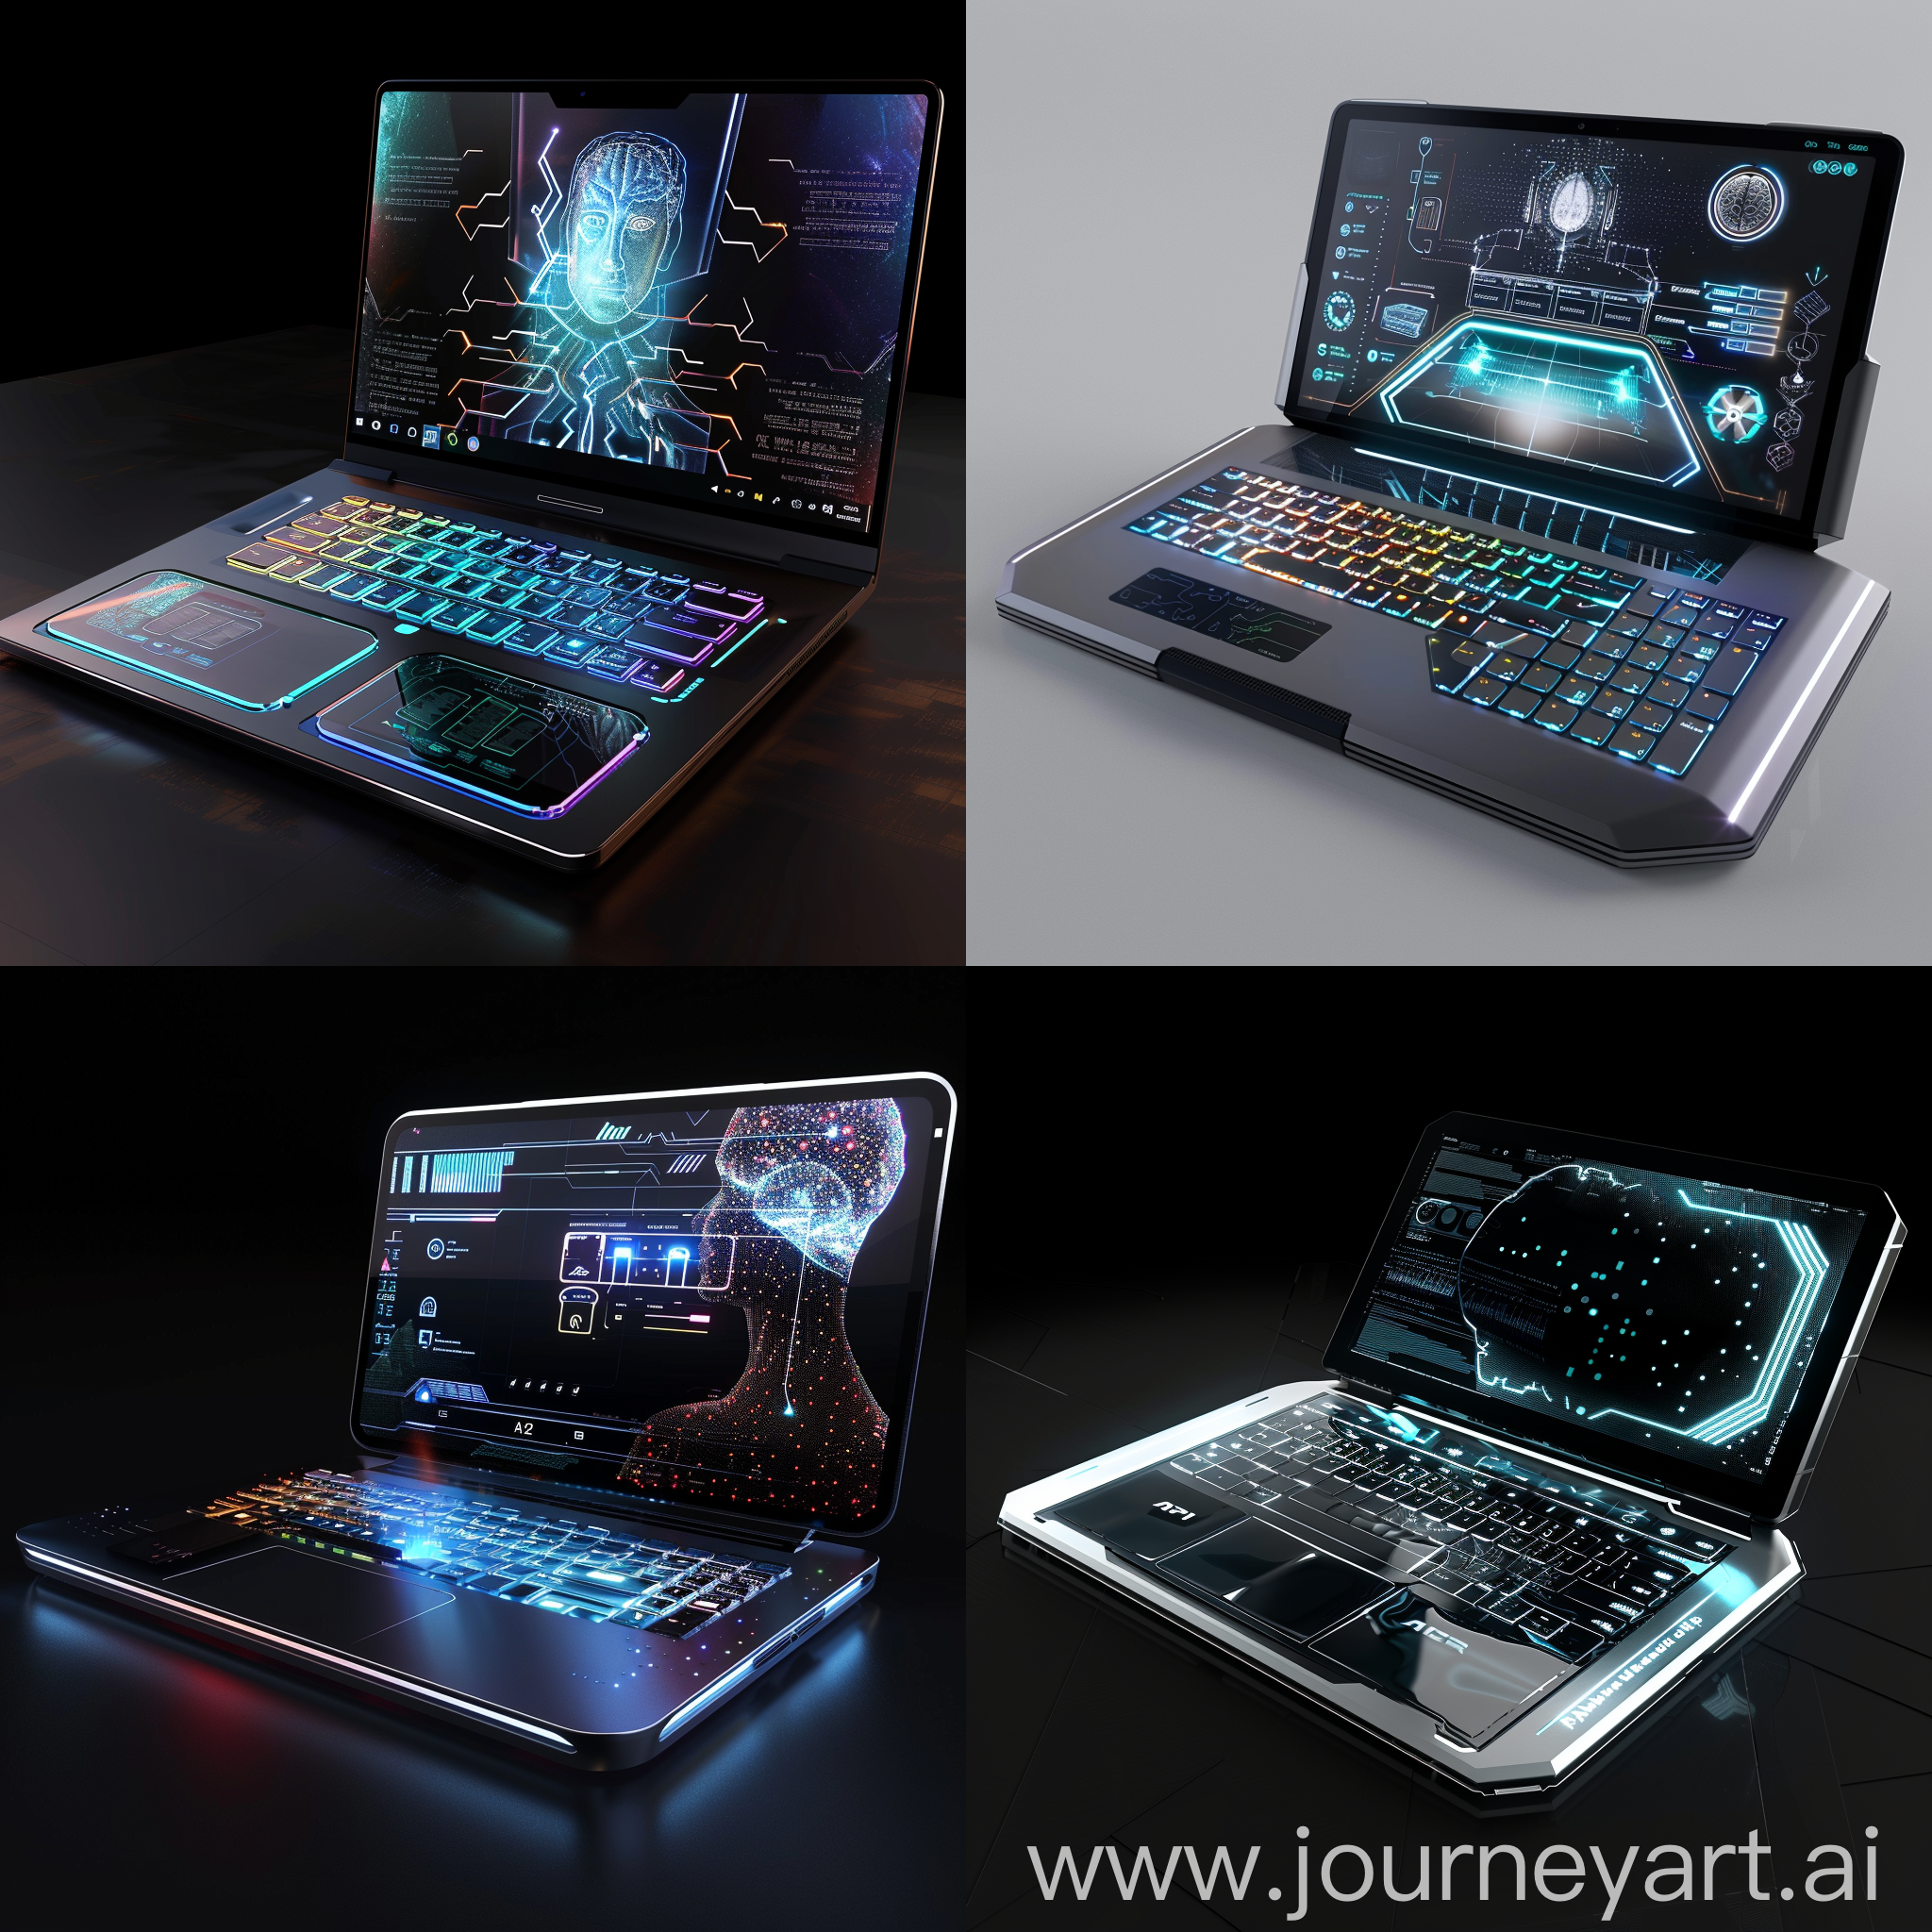 Ultramodern futuristic laptop, Morphing Display, Haptic Keyboard, Brain-Computer Interface (BCI) Integration, Augmented Reality (AR) Overlay, Self-Healing Materials, Ultra-Fast Wireless Charging, Holographic Projection, Advanced Security Features, Modular Design, AI-Powered Assistant, octane render--stylize